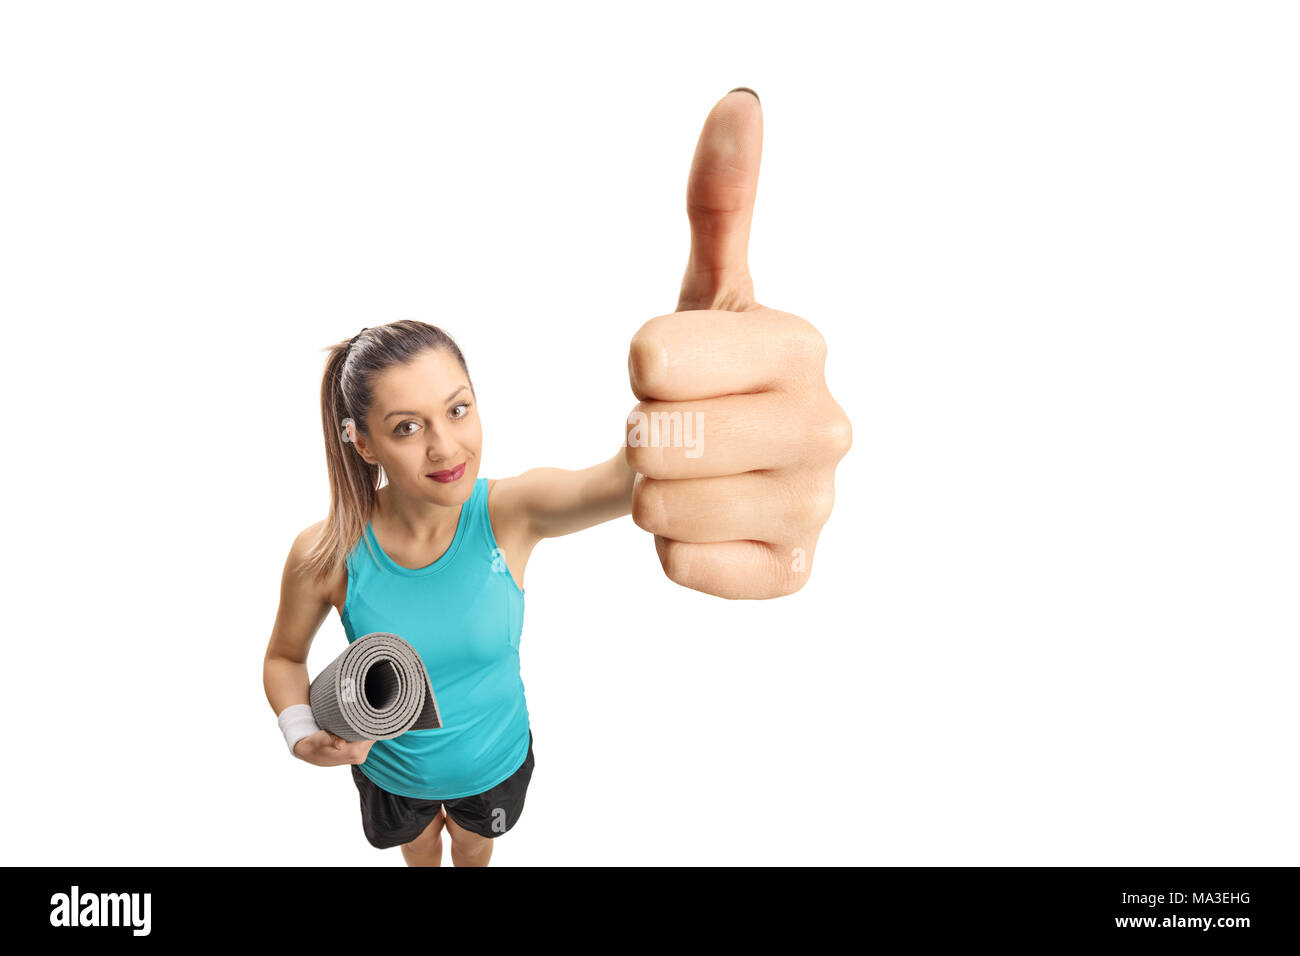 Fitness woman with an exercise mat making a thumb up sign isolated on white background Stock Photo